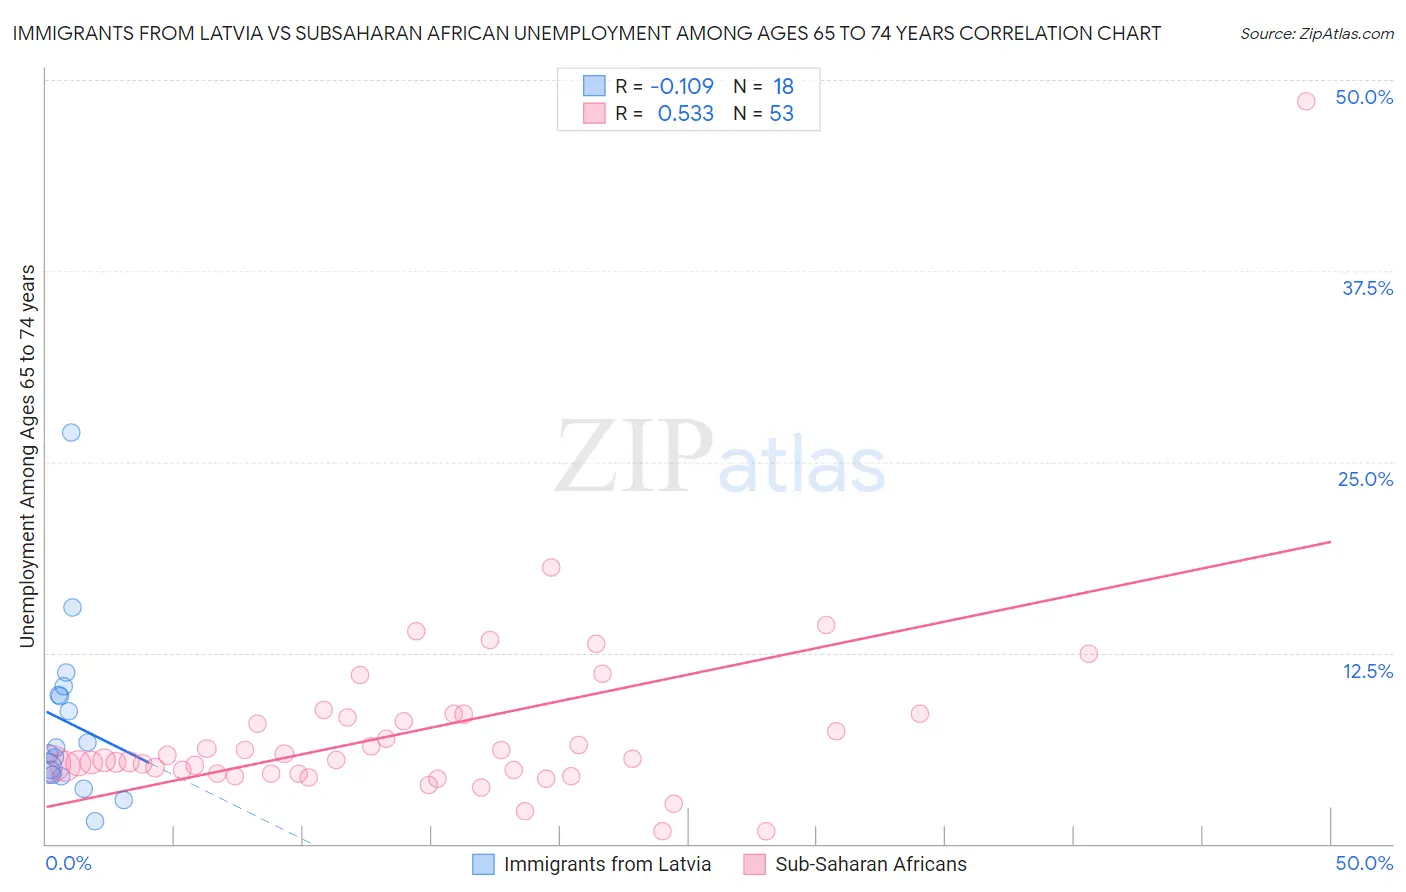 Immigrants from Latvia vs Subsaharan African Unemployment Among Ages 65 to 74 years